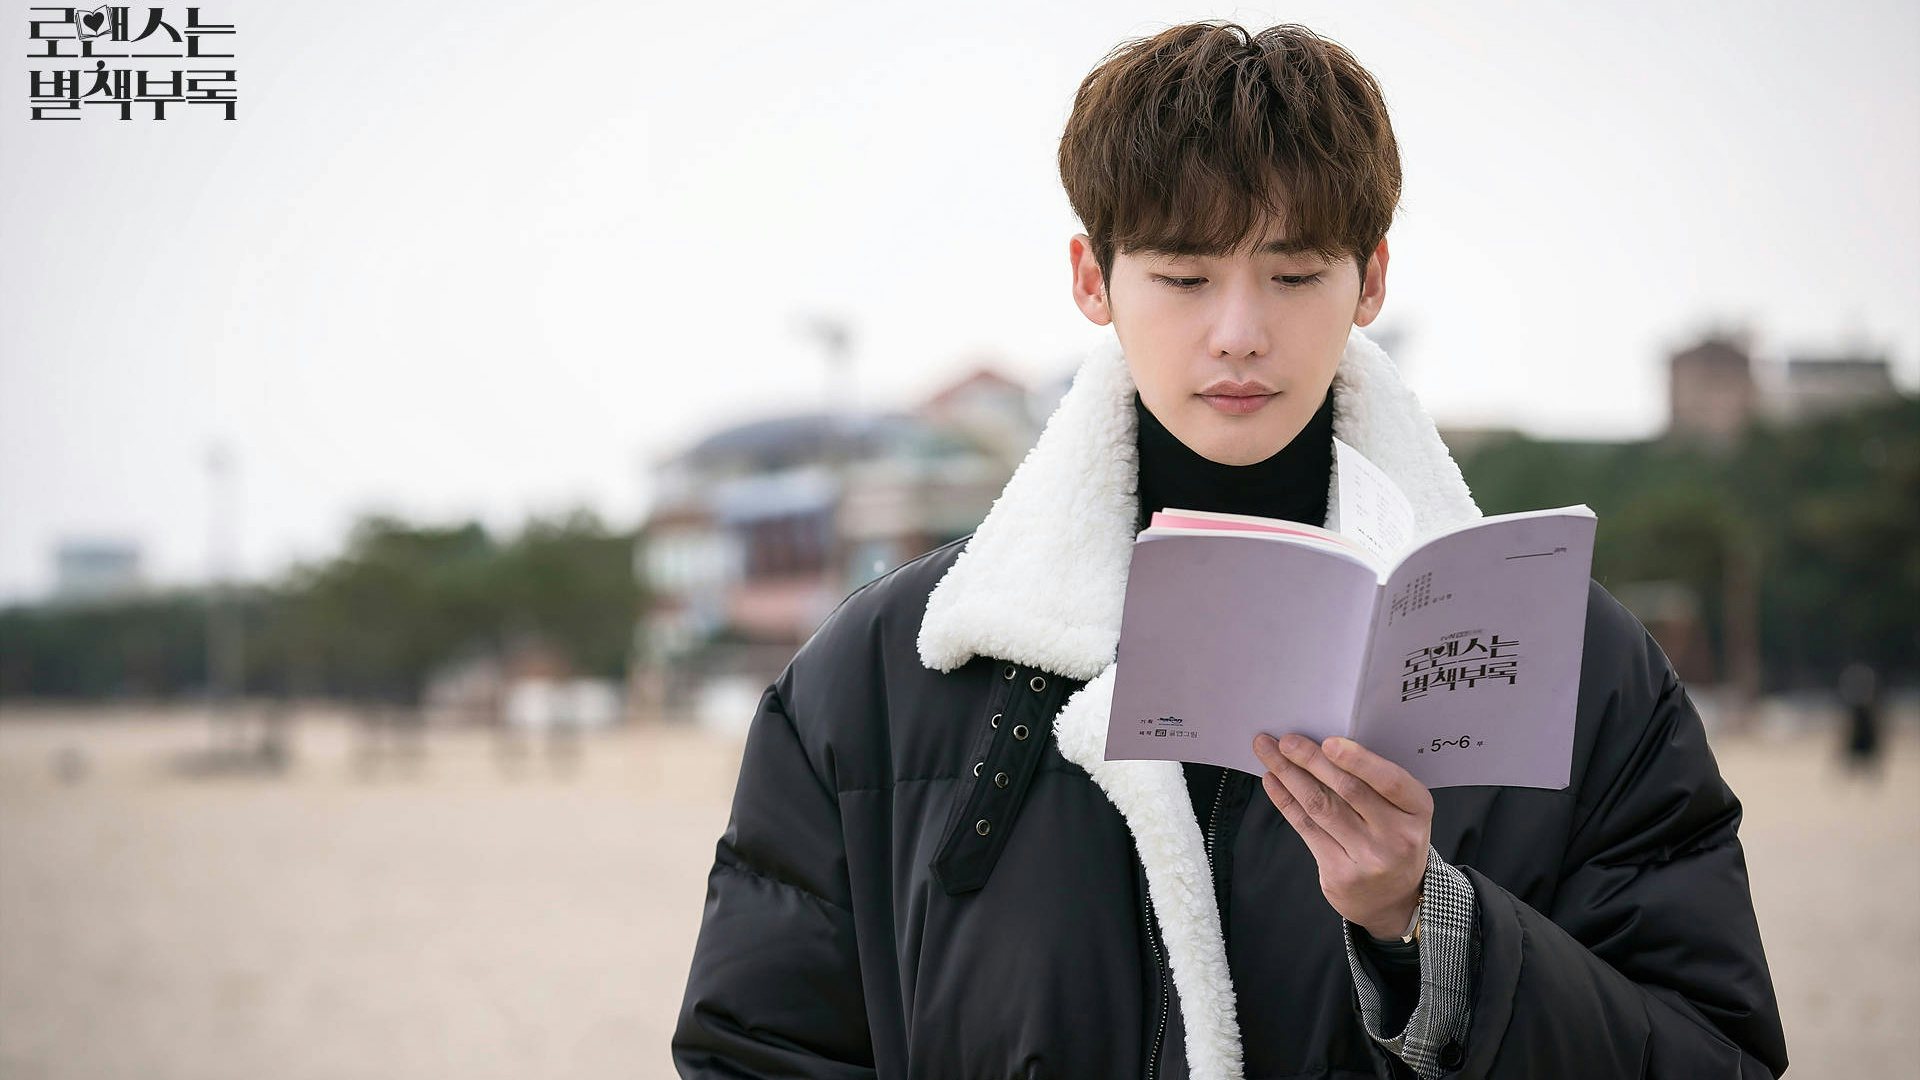 Make-up brand L'Oréal Paris officially appointed Korean actor
Lee Jongsuk its brand ambassador for China, which soon caused strong
netizen reactions. Photo: Courtesy of tvN, Netflix